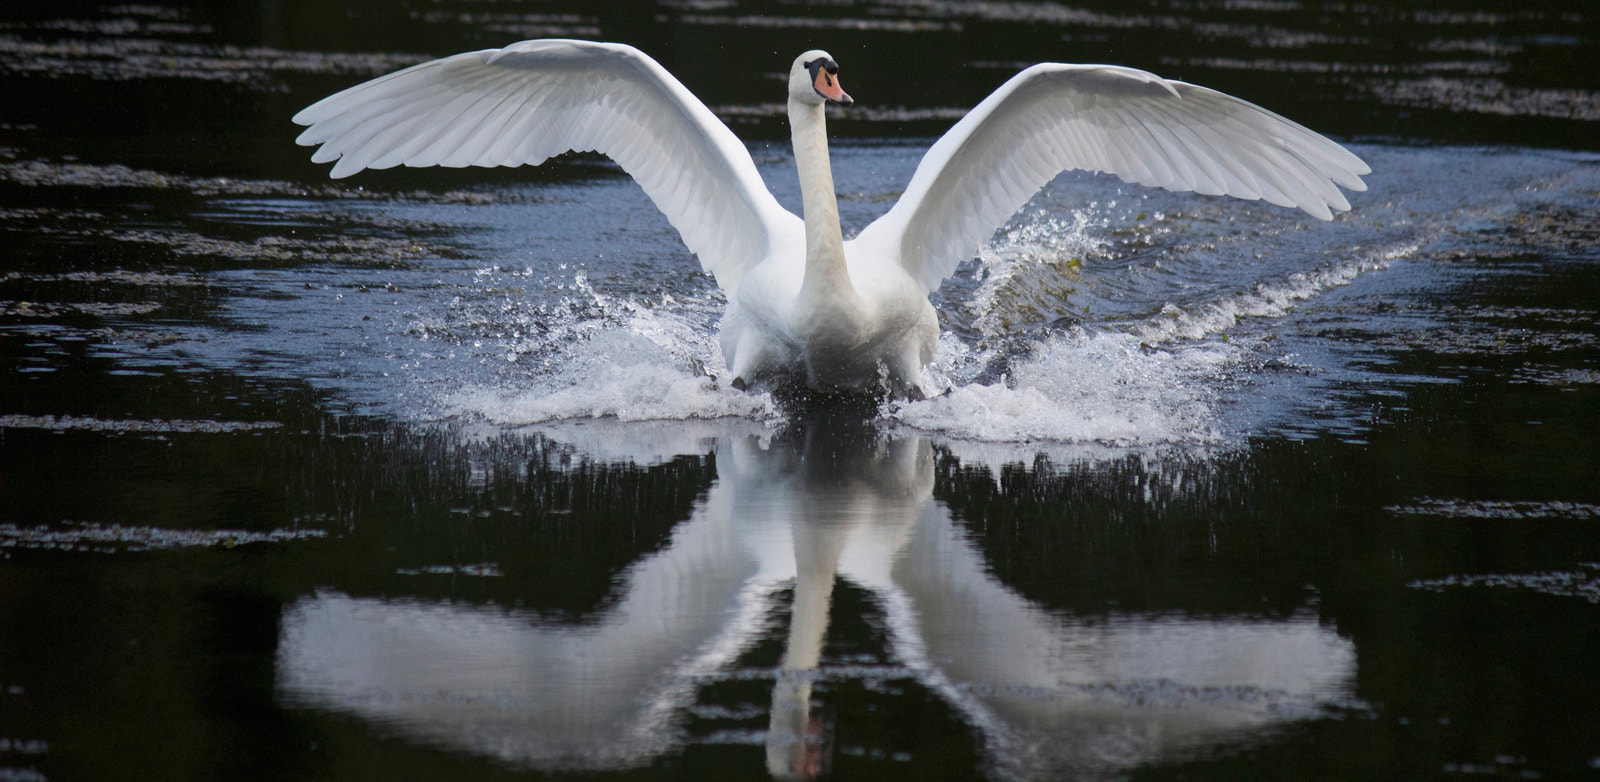 Good panoramic crop. I like the mirror effect in the water and the rim lighting effect on the wings